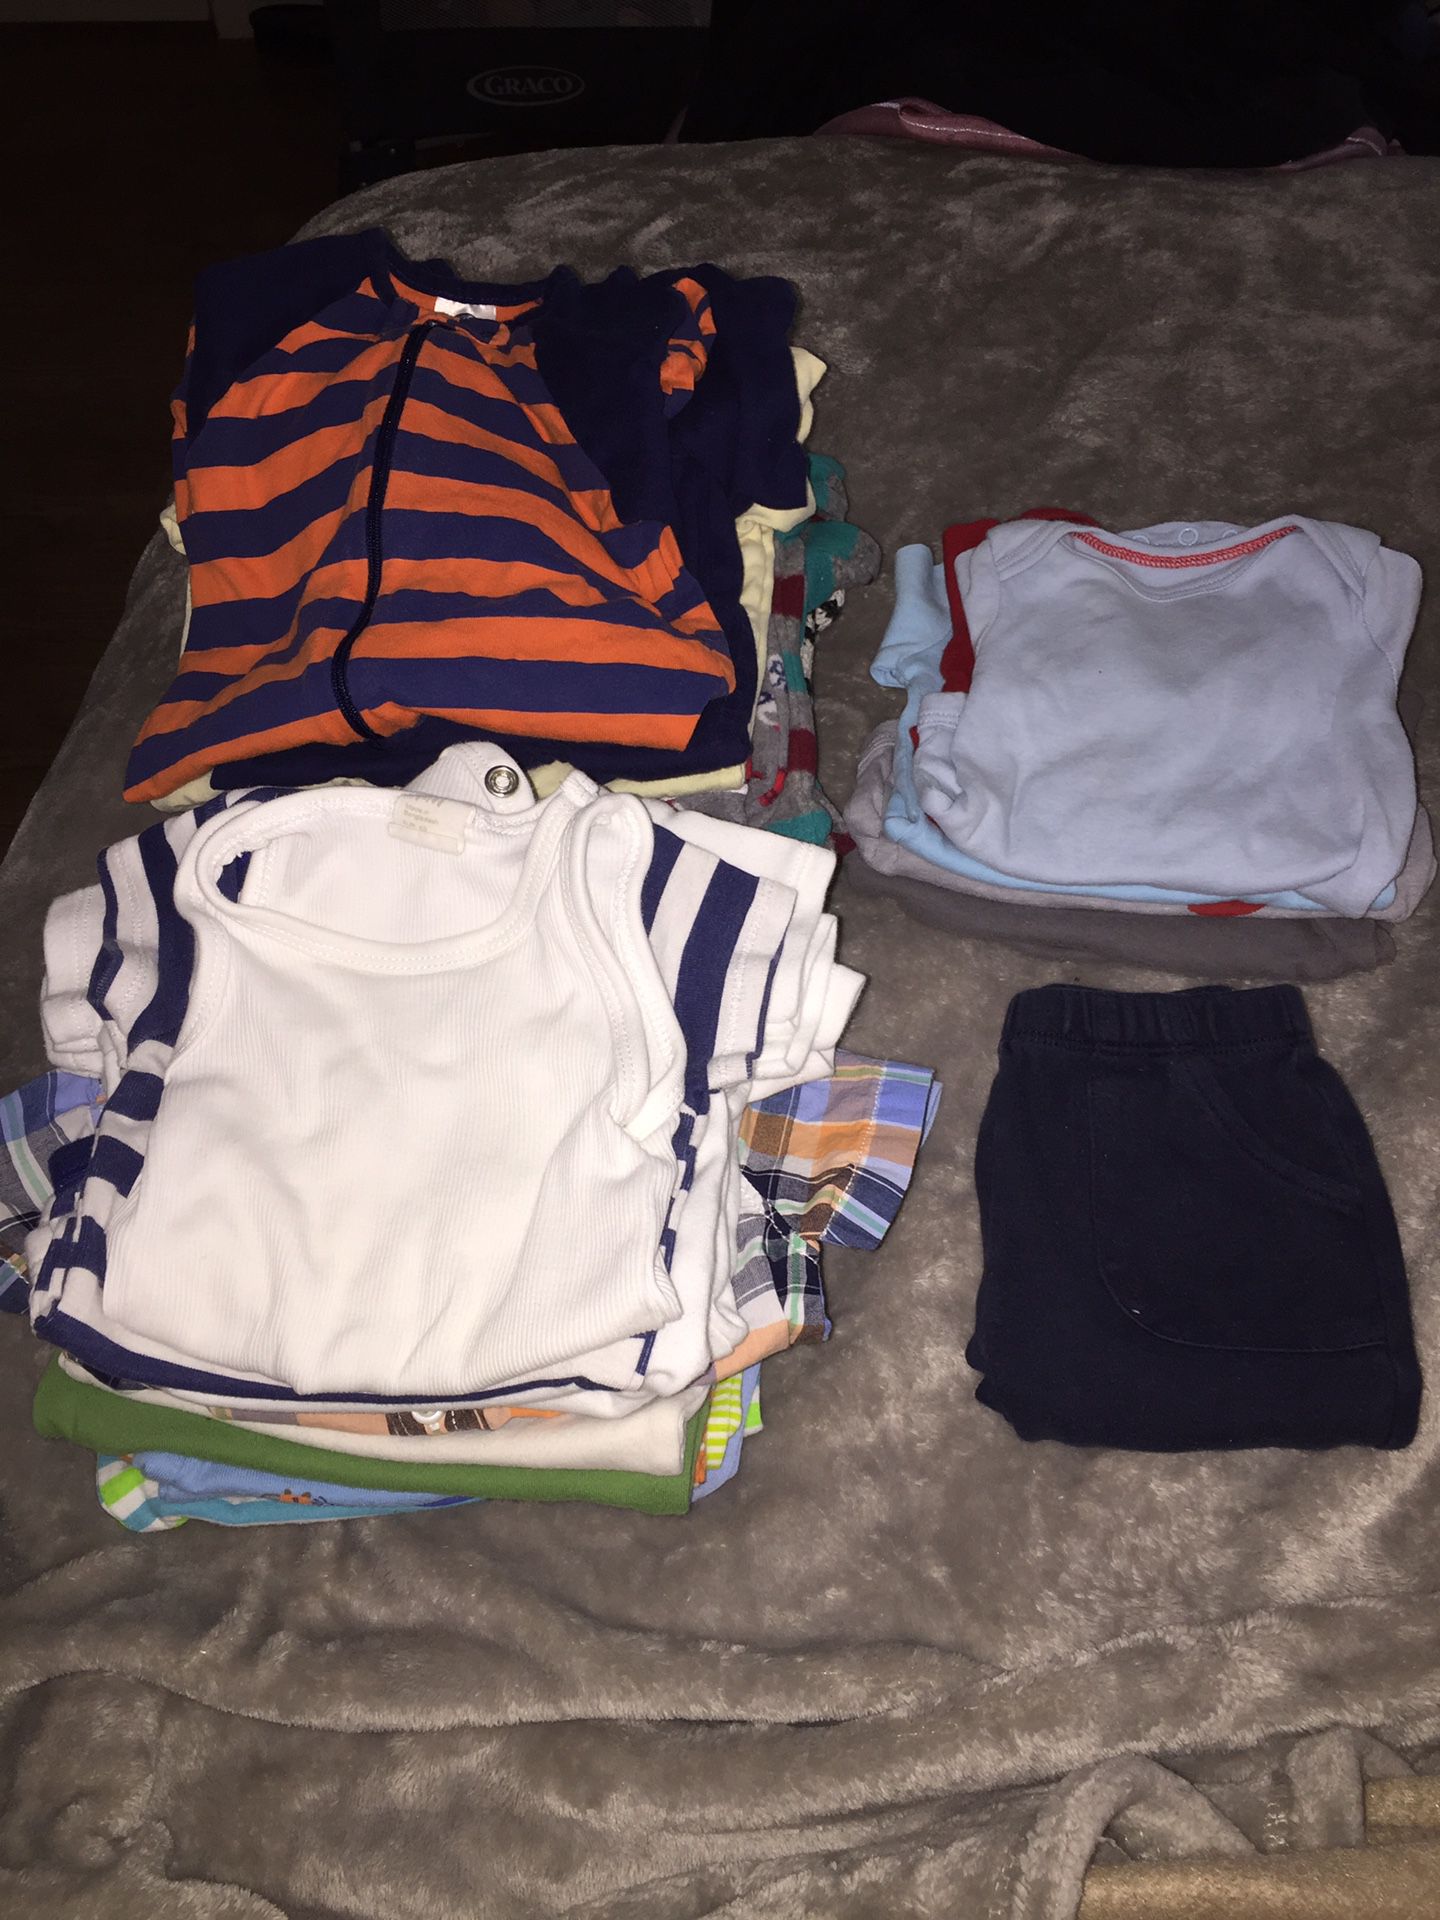 Lot of 0-3months boy clothes- Must go today! $15